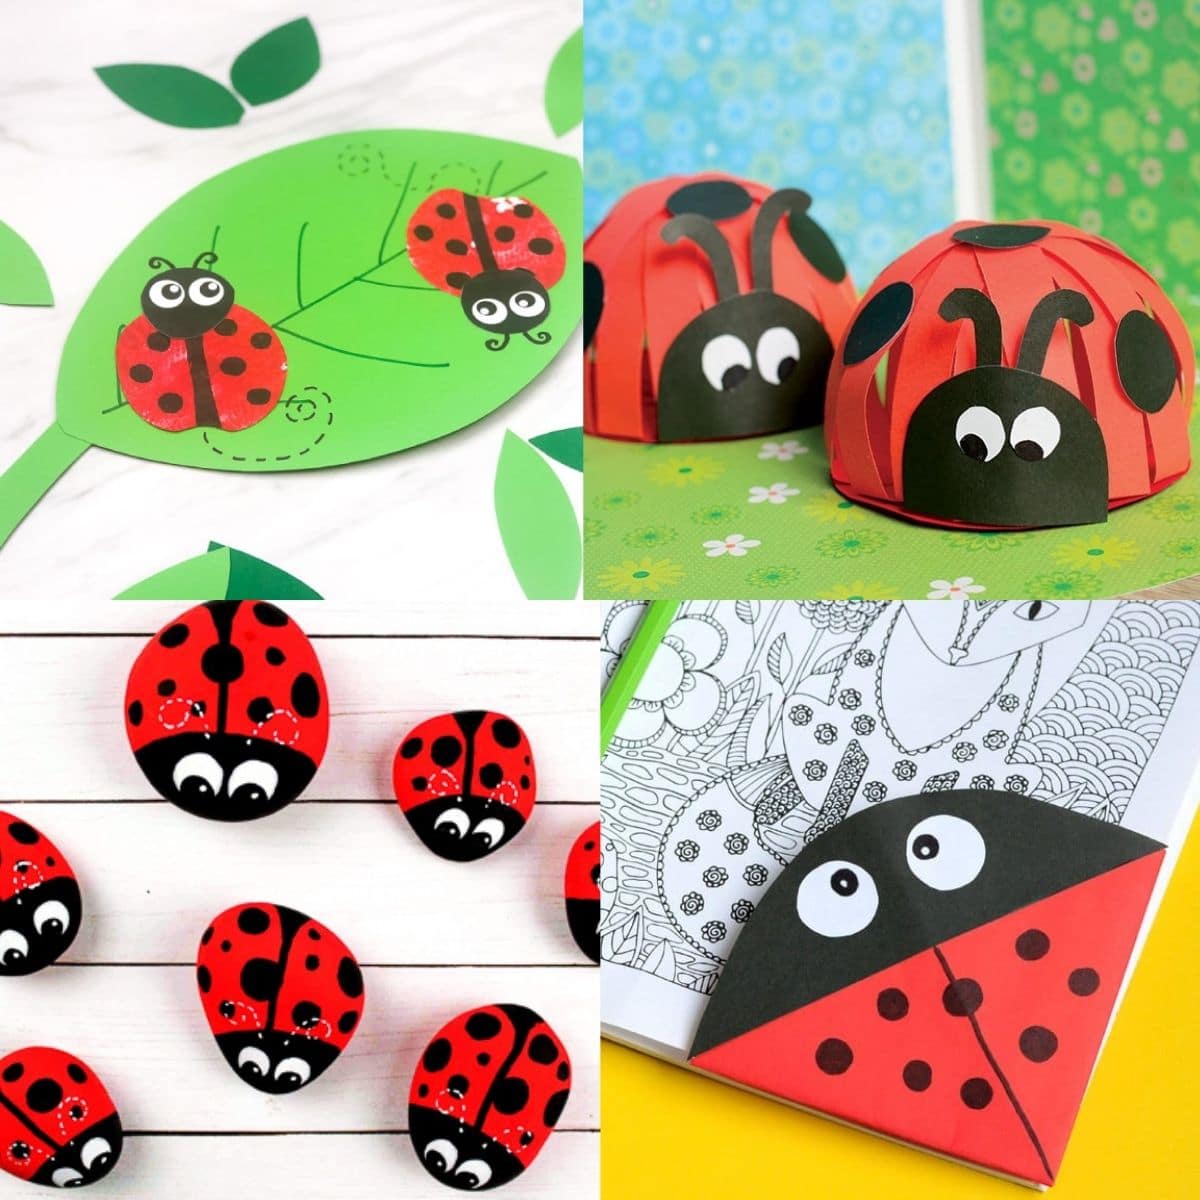 Construction Paper Ladybug on a Leaf - Easy Peasy and Fun